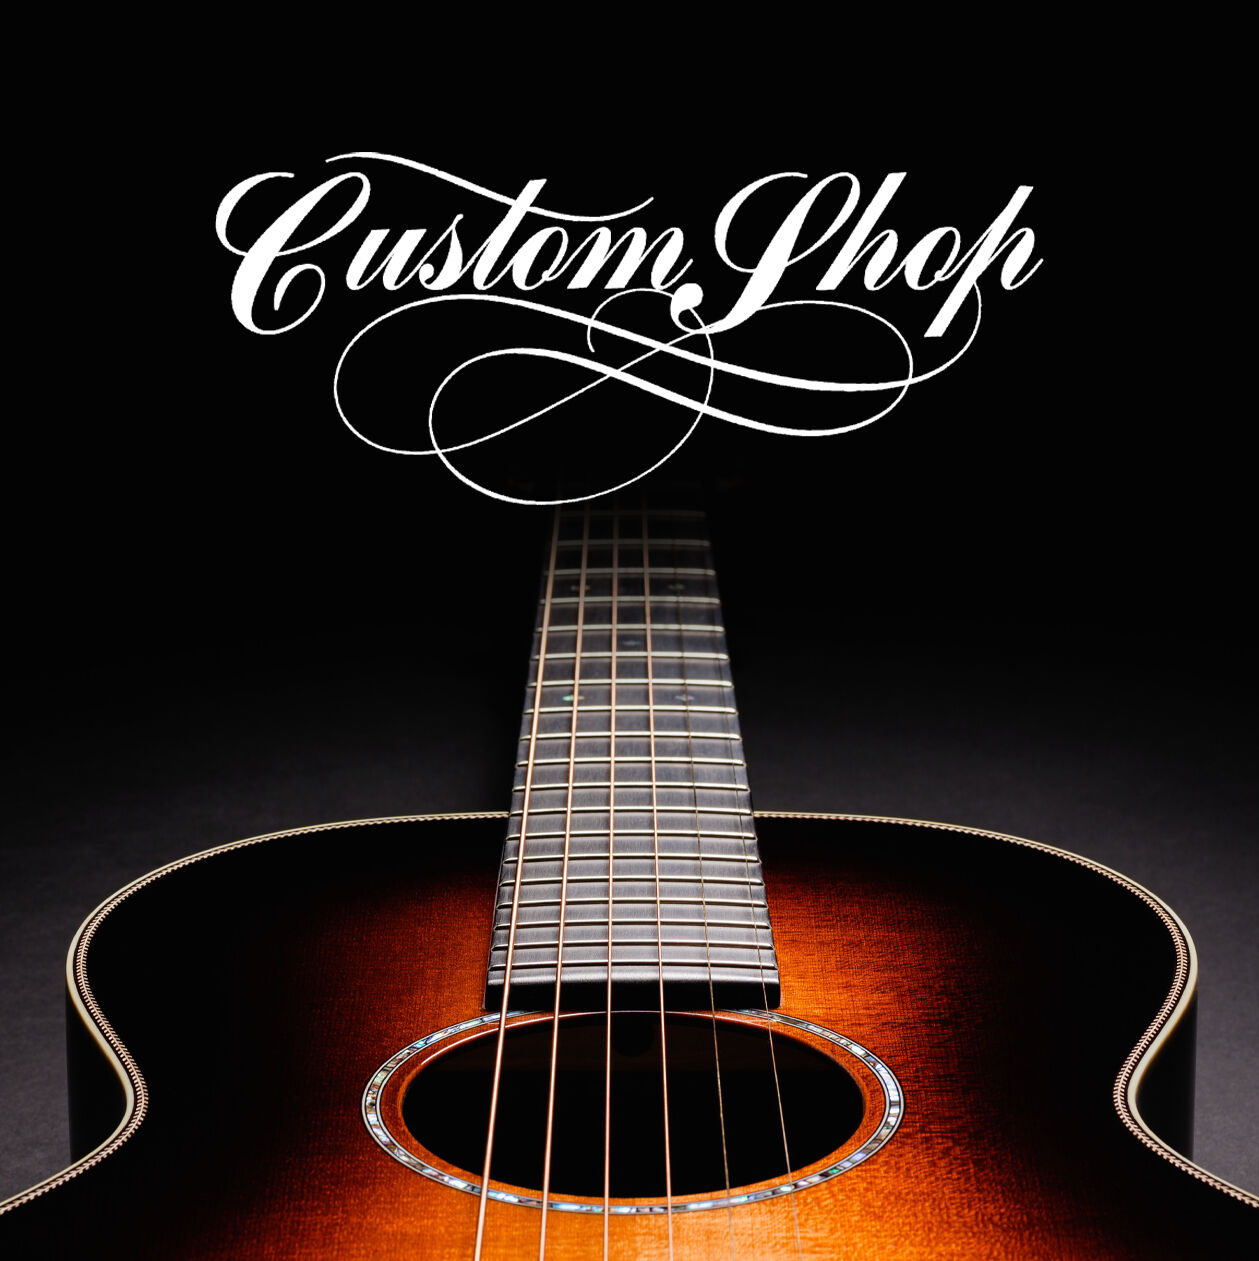 photo of an acoustic guitar on a black background, with stylized type that says custom shop